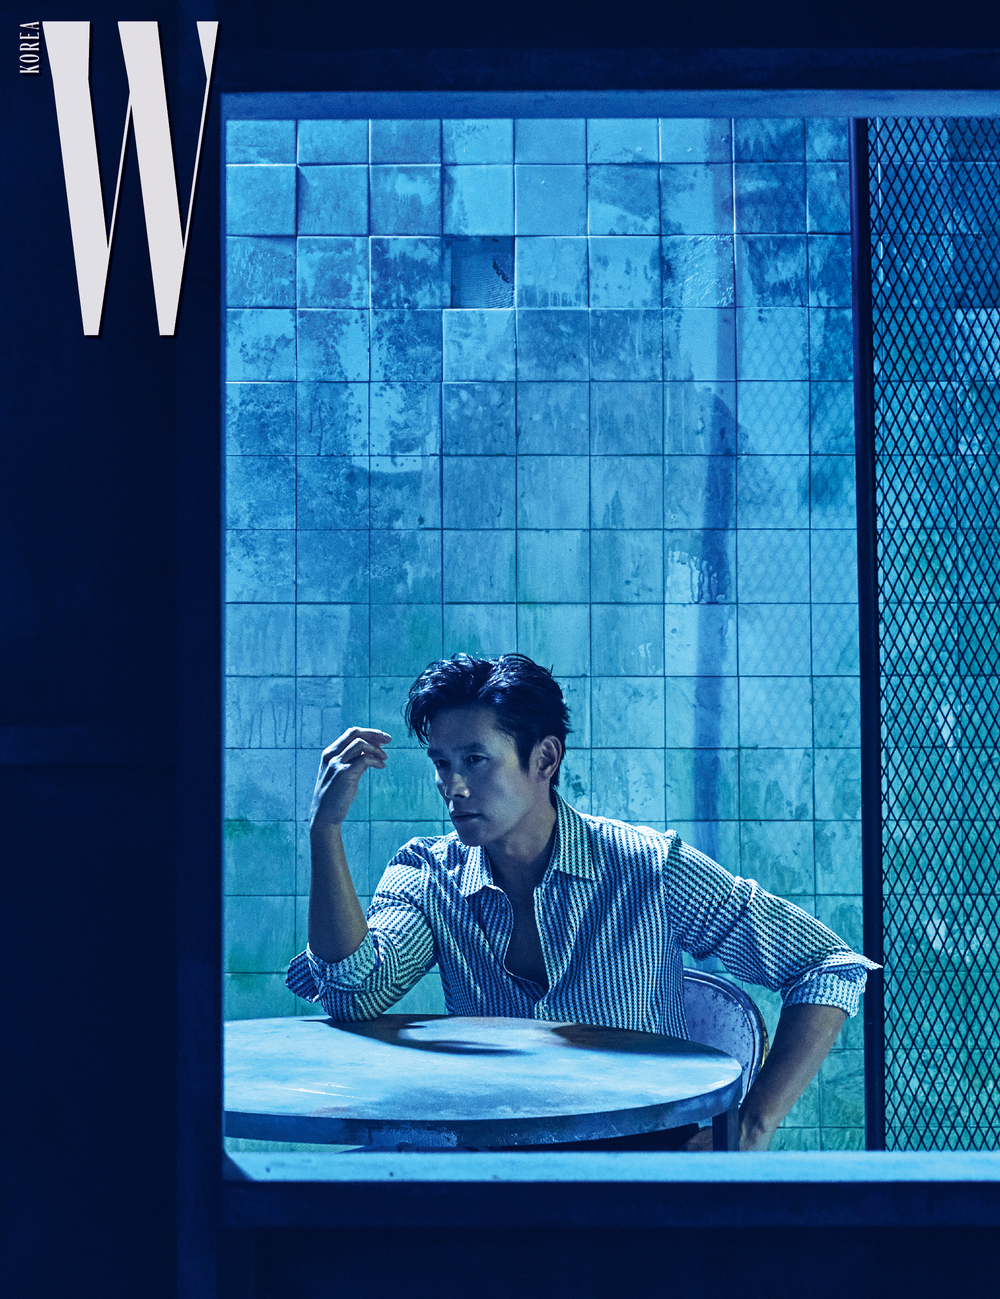 Lee Byung-hun, Kwak Do-won, and Lee Hee-joon conducted a February issue of W Korea published on January 20.A special picture was released on January 20, with the movie Namsans managers gaining popularity among the media and audiences.The photo, which was released this time, was accompanied by three major figures of Namsans chiefs who competed for loyalty with the second place of power.Lee Byung-hun, who played the role of Kim Gyu-pyeong, the head of the Central Intelligence Agency on the Constitution, Kwak Do-won, who was once the head of the Central Intelligence Agency but turned into a whistleblower, and Lee Hee-joon, the presidents security chief, Kwak Sang-cheon,In the picture released online, there is a picture of three actors who feel presence just by standing.Doberman, who is famous for his loyal breed, joined together to bring about a clean picture concept symbolizing the films loyalty competition.Lee Byung-hun The deep face of Actor Lee Byung-hun, who can tell everything with his eyes alone, attracts attention.Meanwhile, Namsans chiefs are aiming for the New Year holidays after the media preview.Audiences and media outlets who watched the movie through the premiere are living high on the brilliant performances of actors, outstanding sense of development and immersion, including Lee Byung-huns mad act, which seems to be watching the Korean version of Joker.bak-beauty